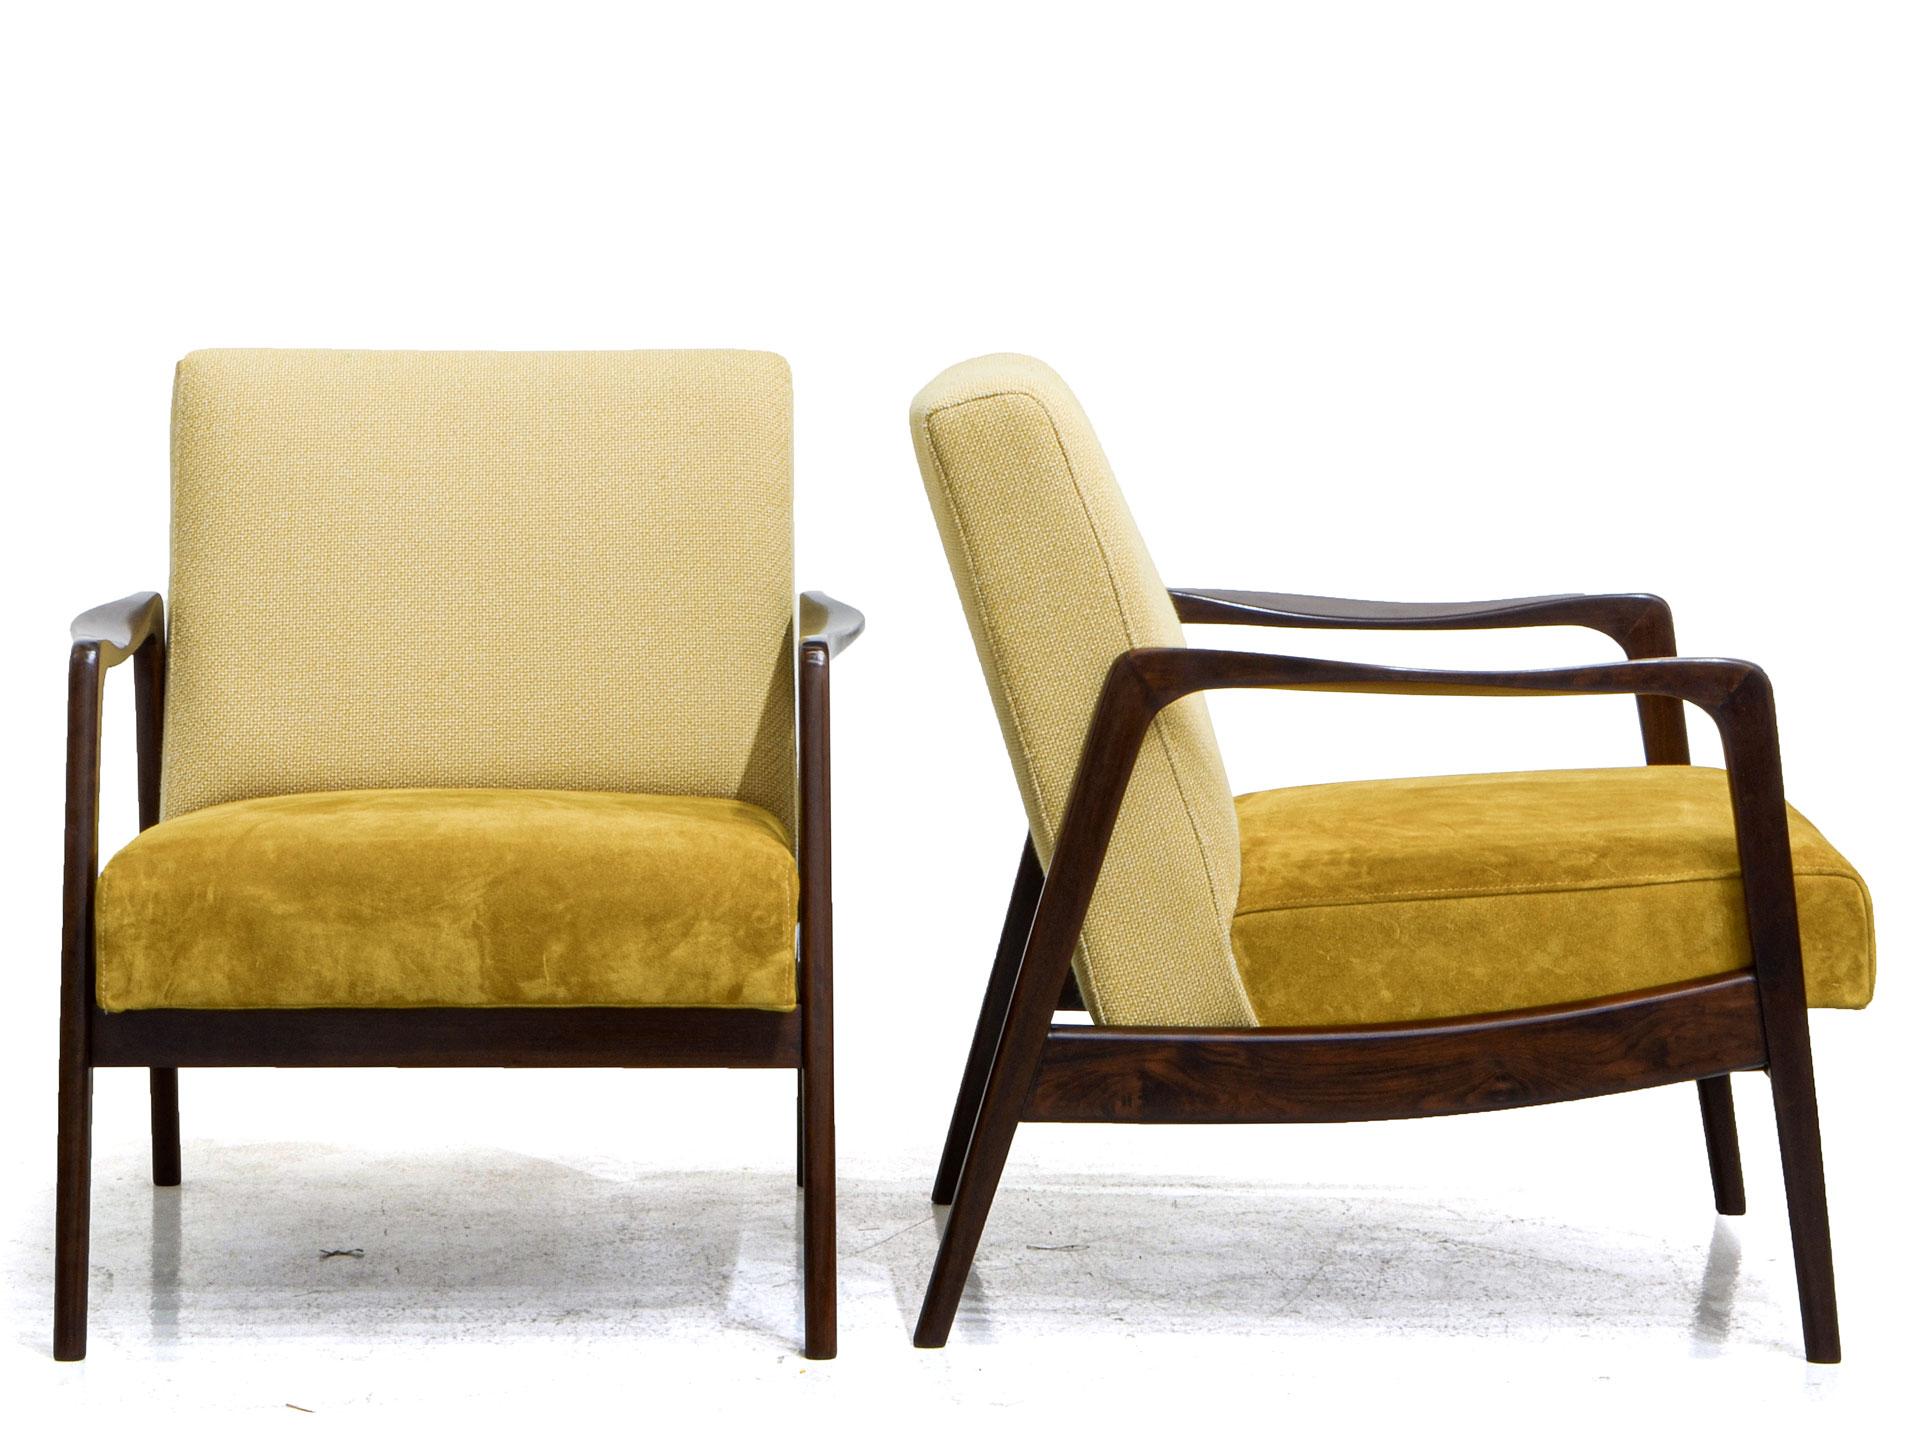 This beautiful pair of armchairs is definitely an eyecatcher. The design of the Jacaranda rosewood structure combines beautifully the organic shape and the geometric lines. It is a unique shape that distinguishes itself in any interior. 

Lucio